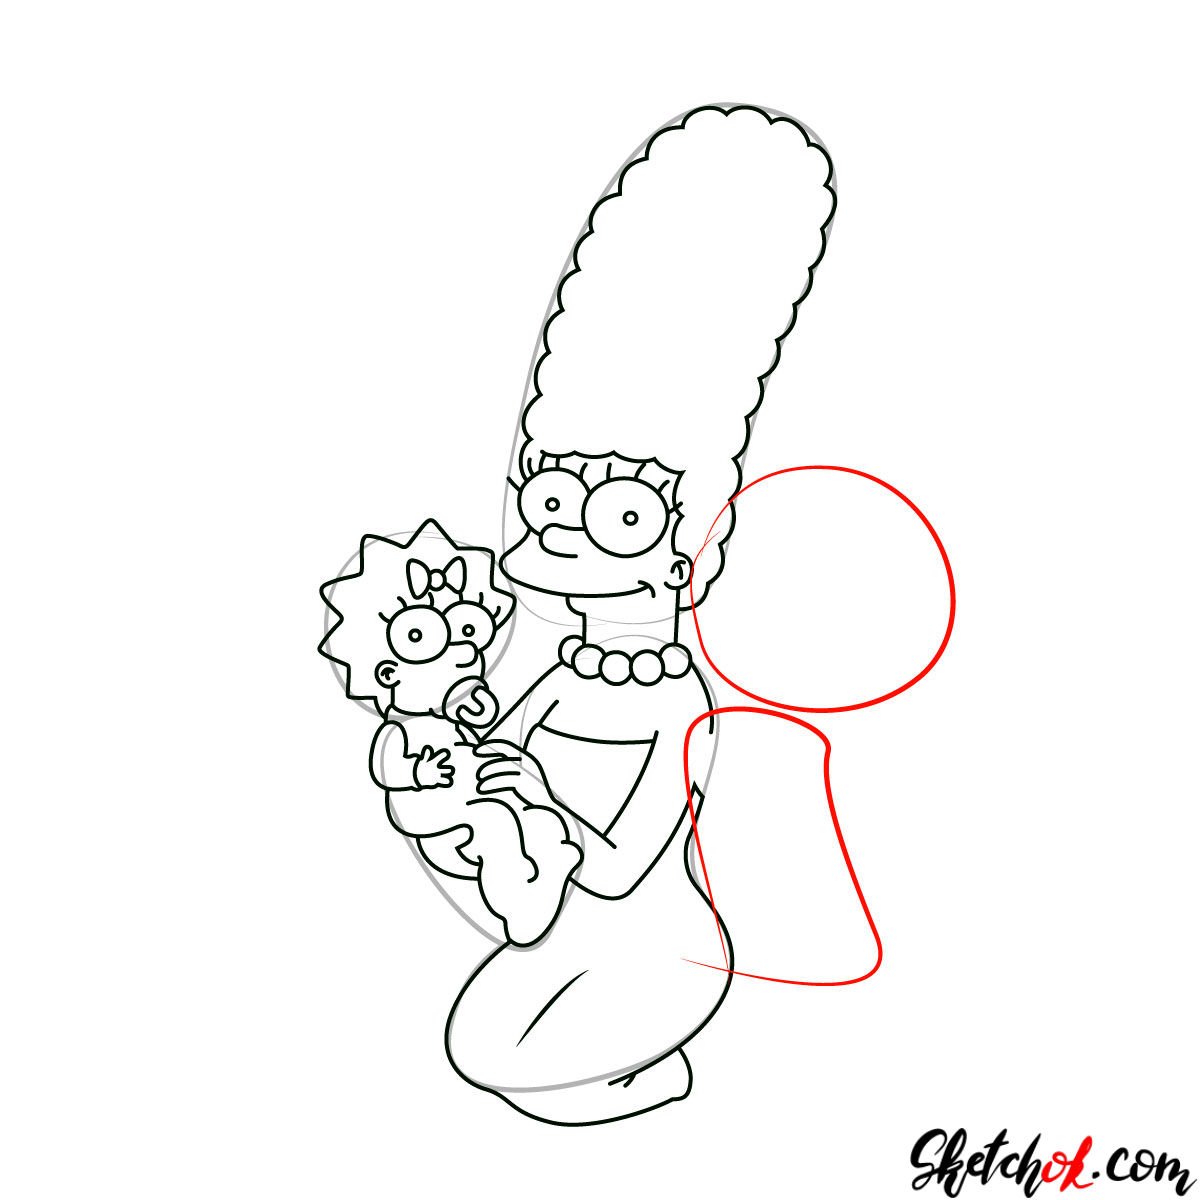 How to draw the Simpsons Family - step 10